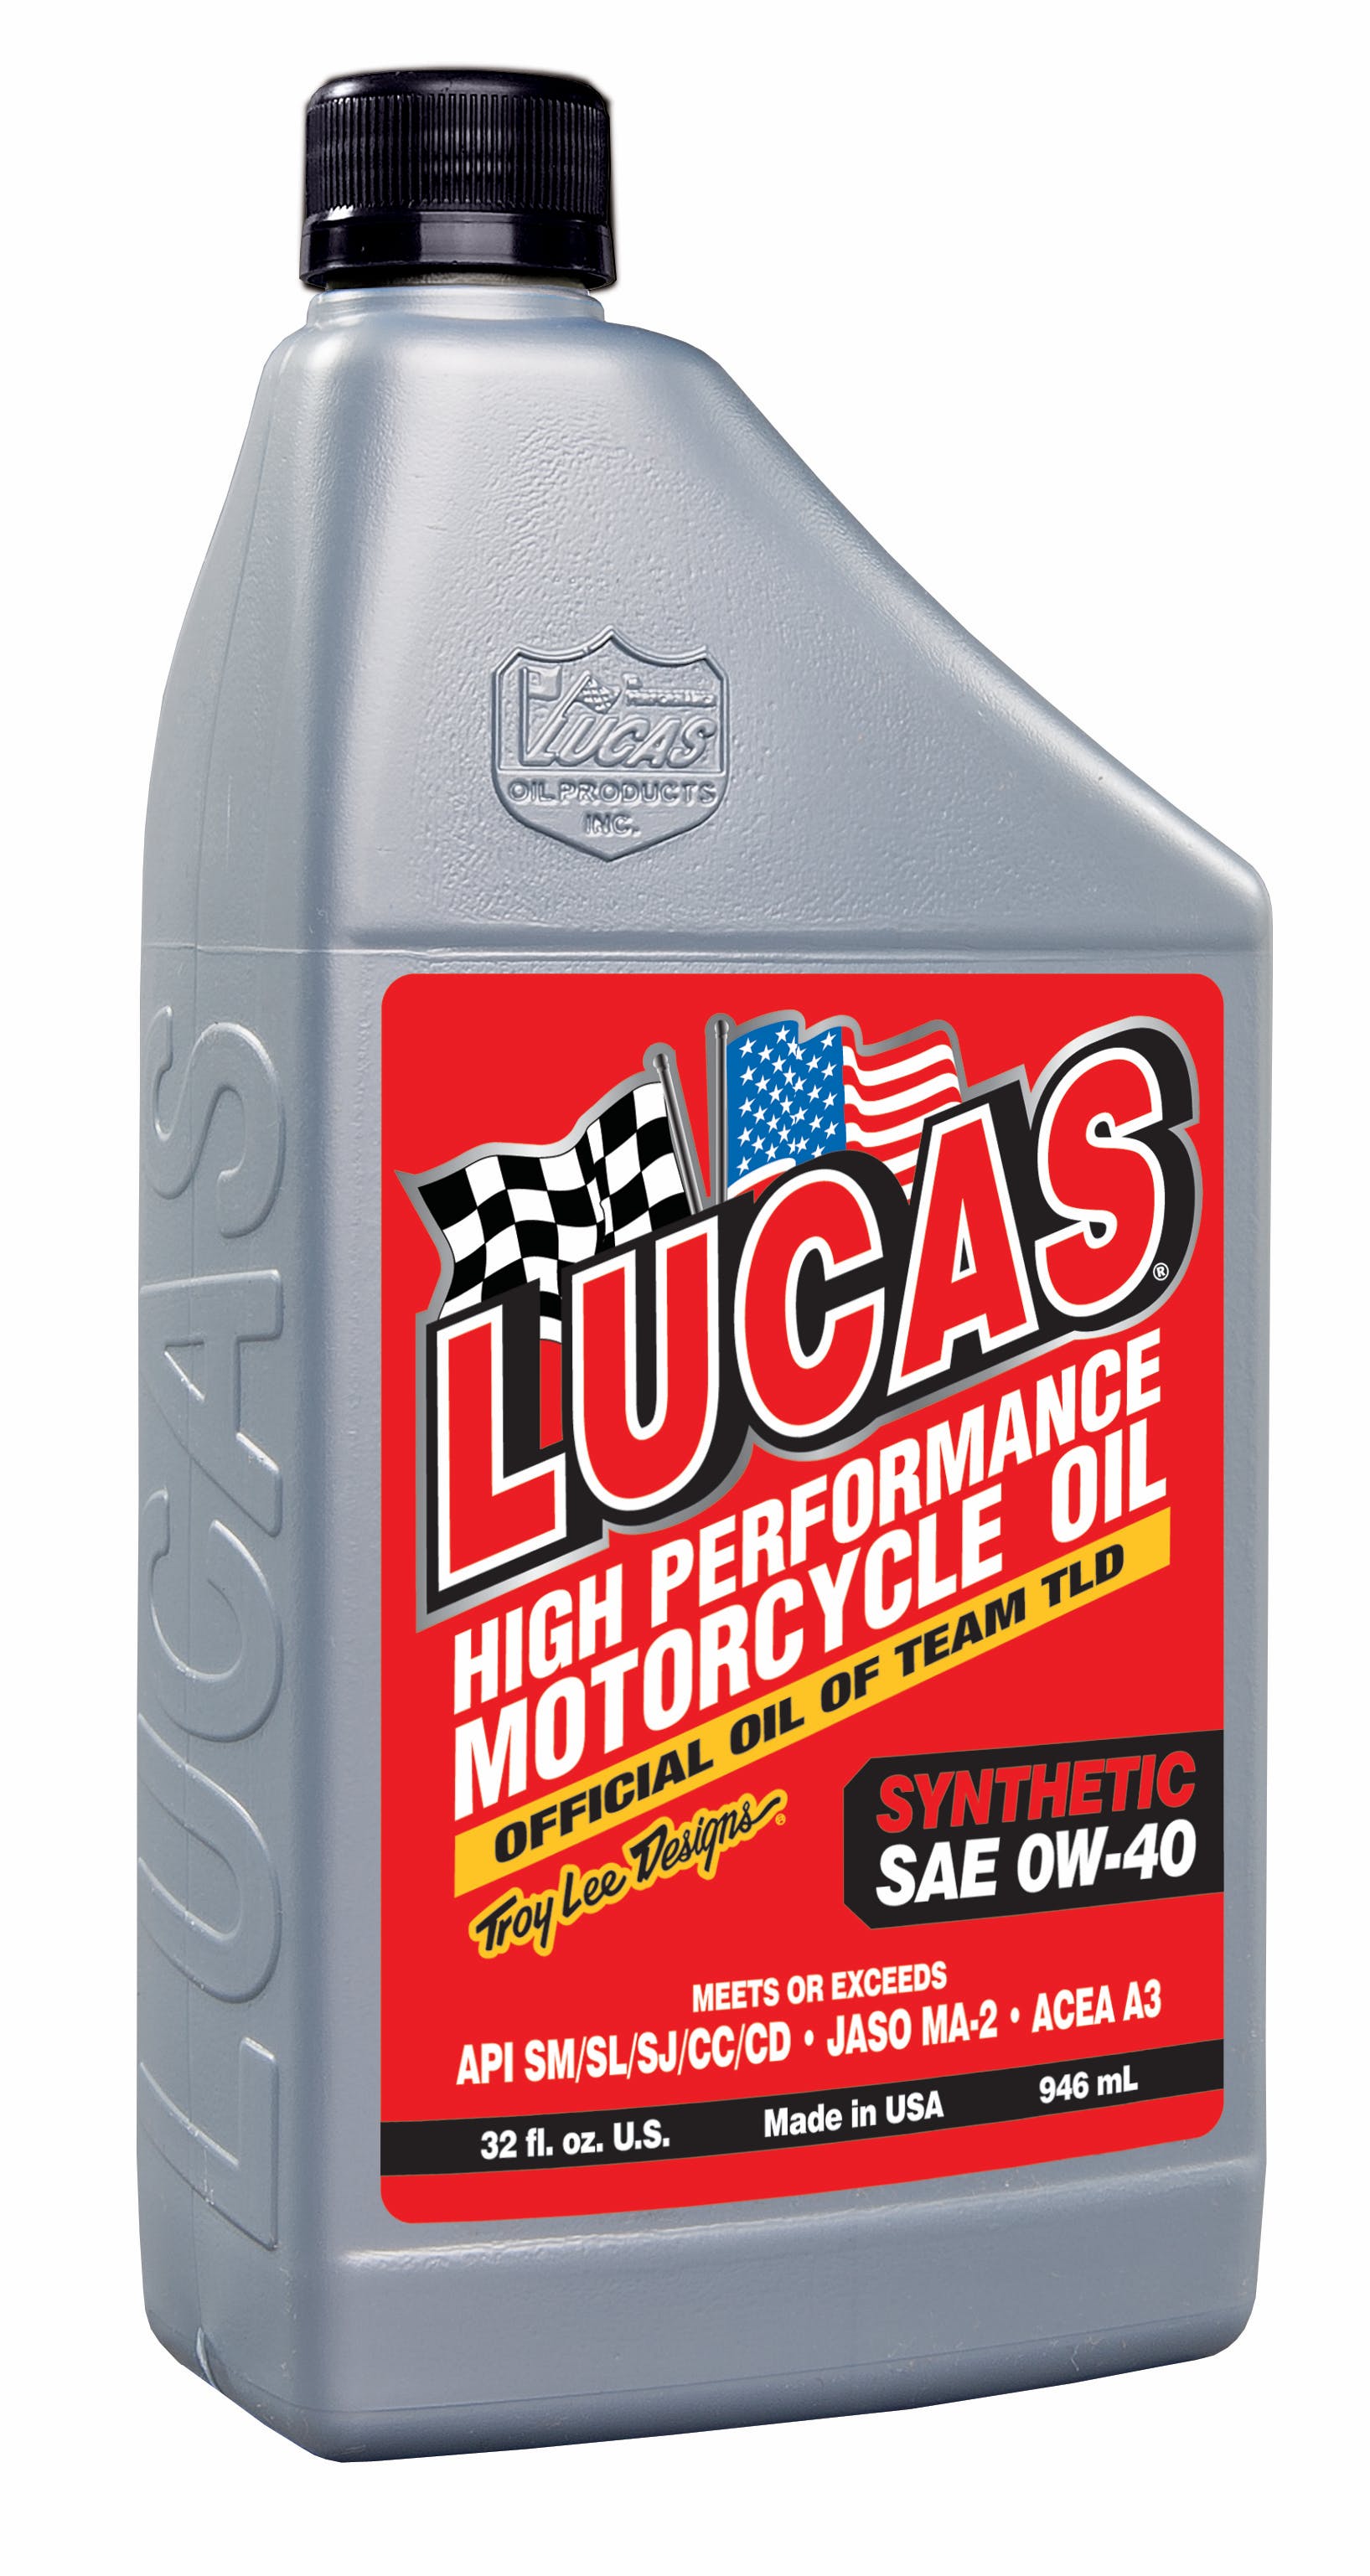 Lucas OIL Synthetic SAE 0W-40 Motorcycle Oil (1 QT) 20718